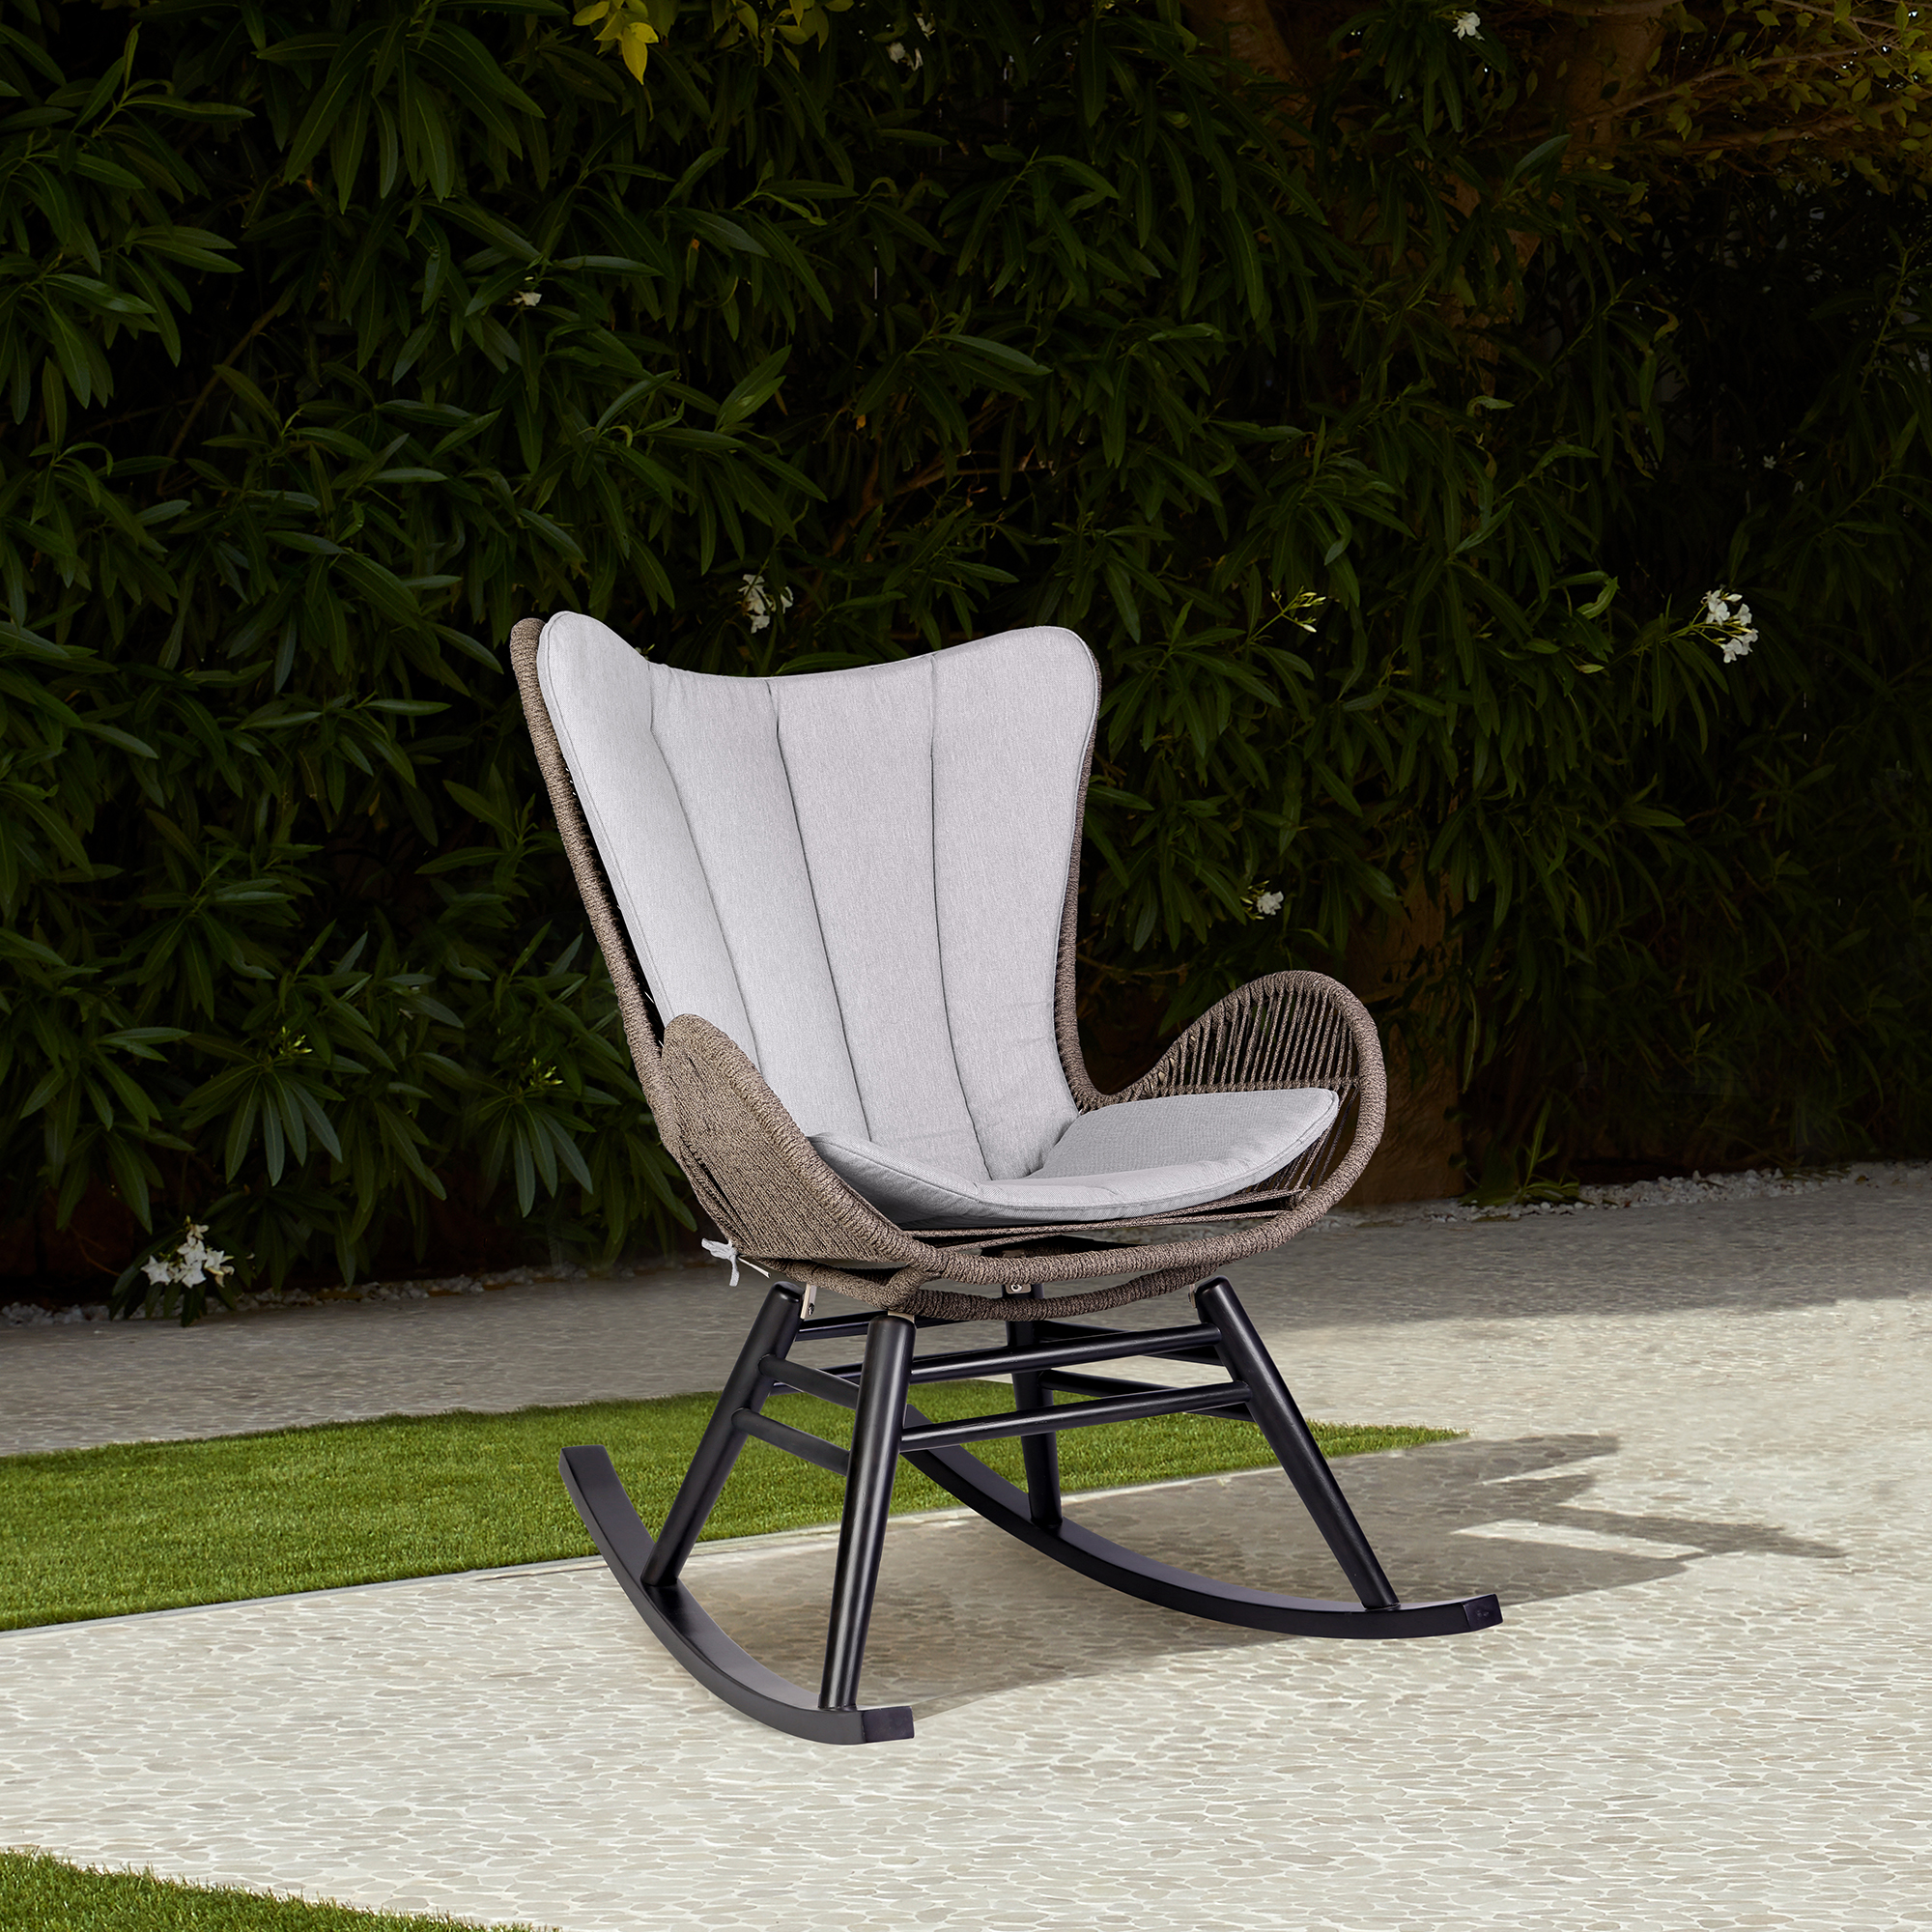 Fanny Outdoor Patio Rocking chair in Dark Eucalyptus Wood and Truffle Rope - image 2 of 12